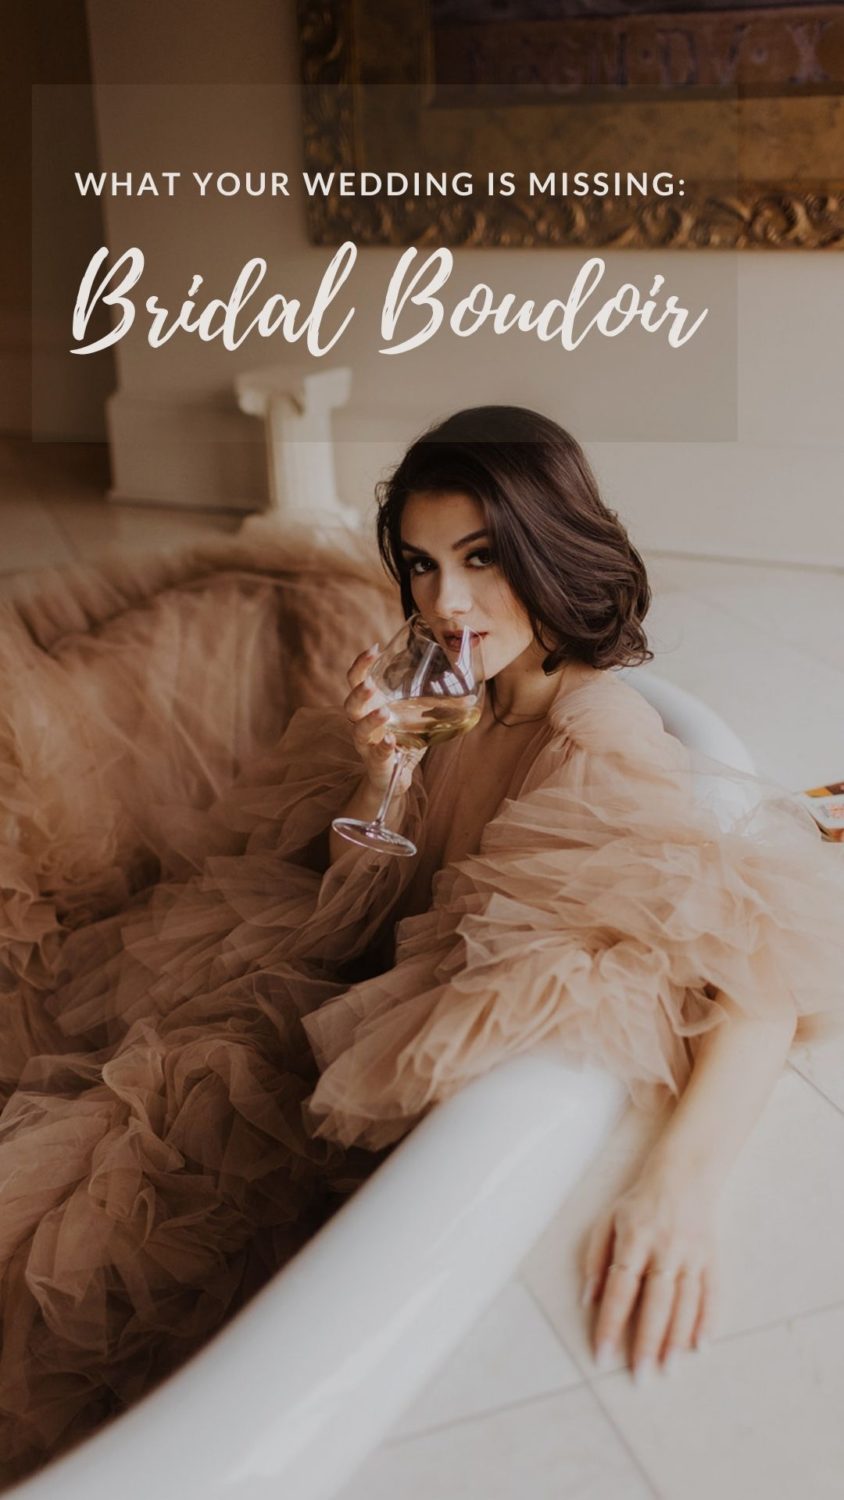 Bride sits in bathtub sipping champagne wearing wedding lingerie.